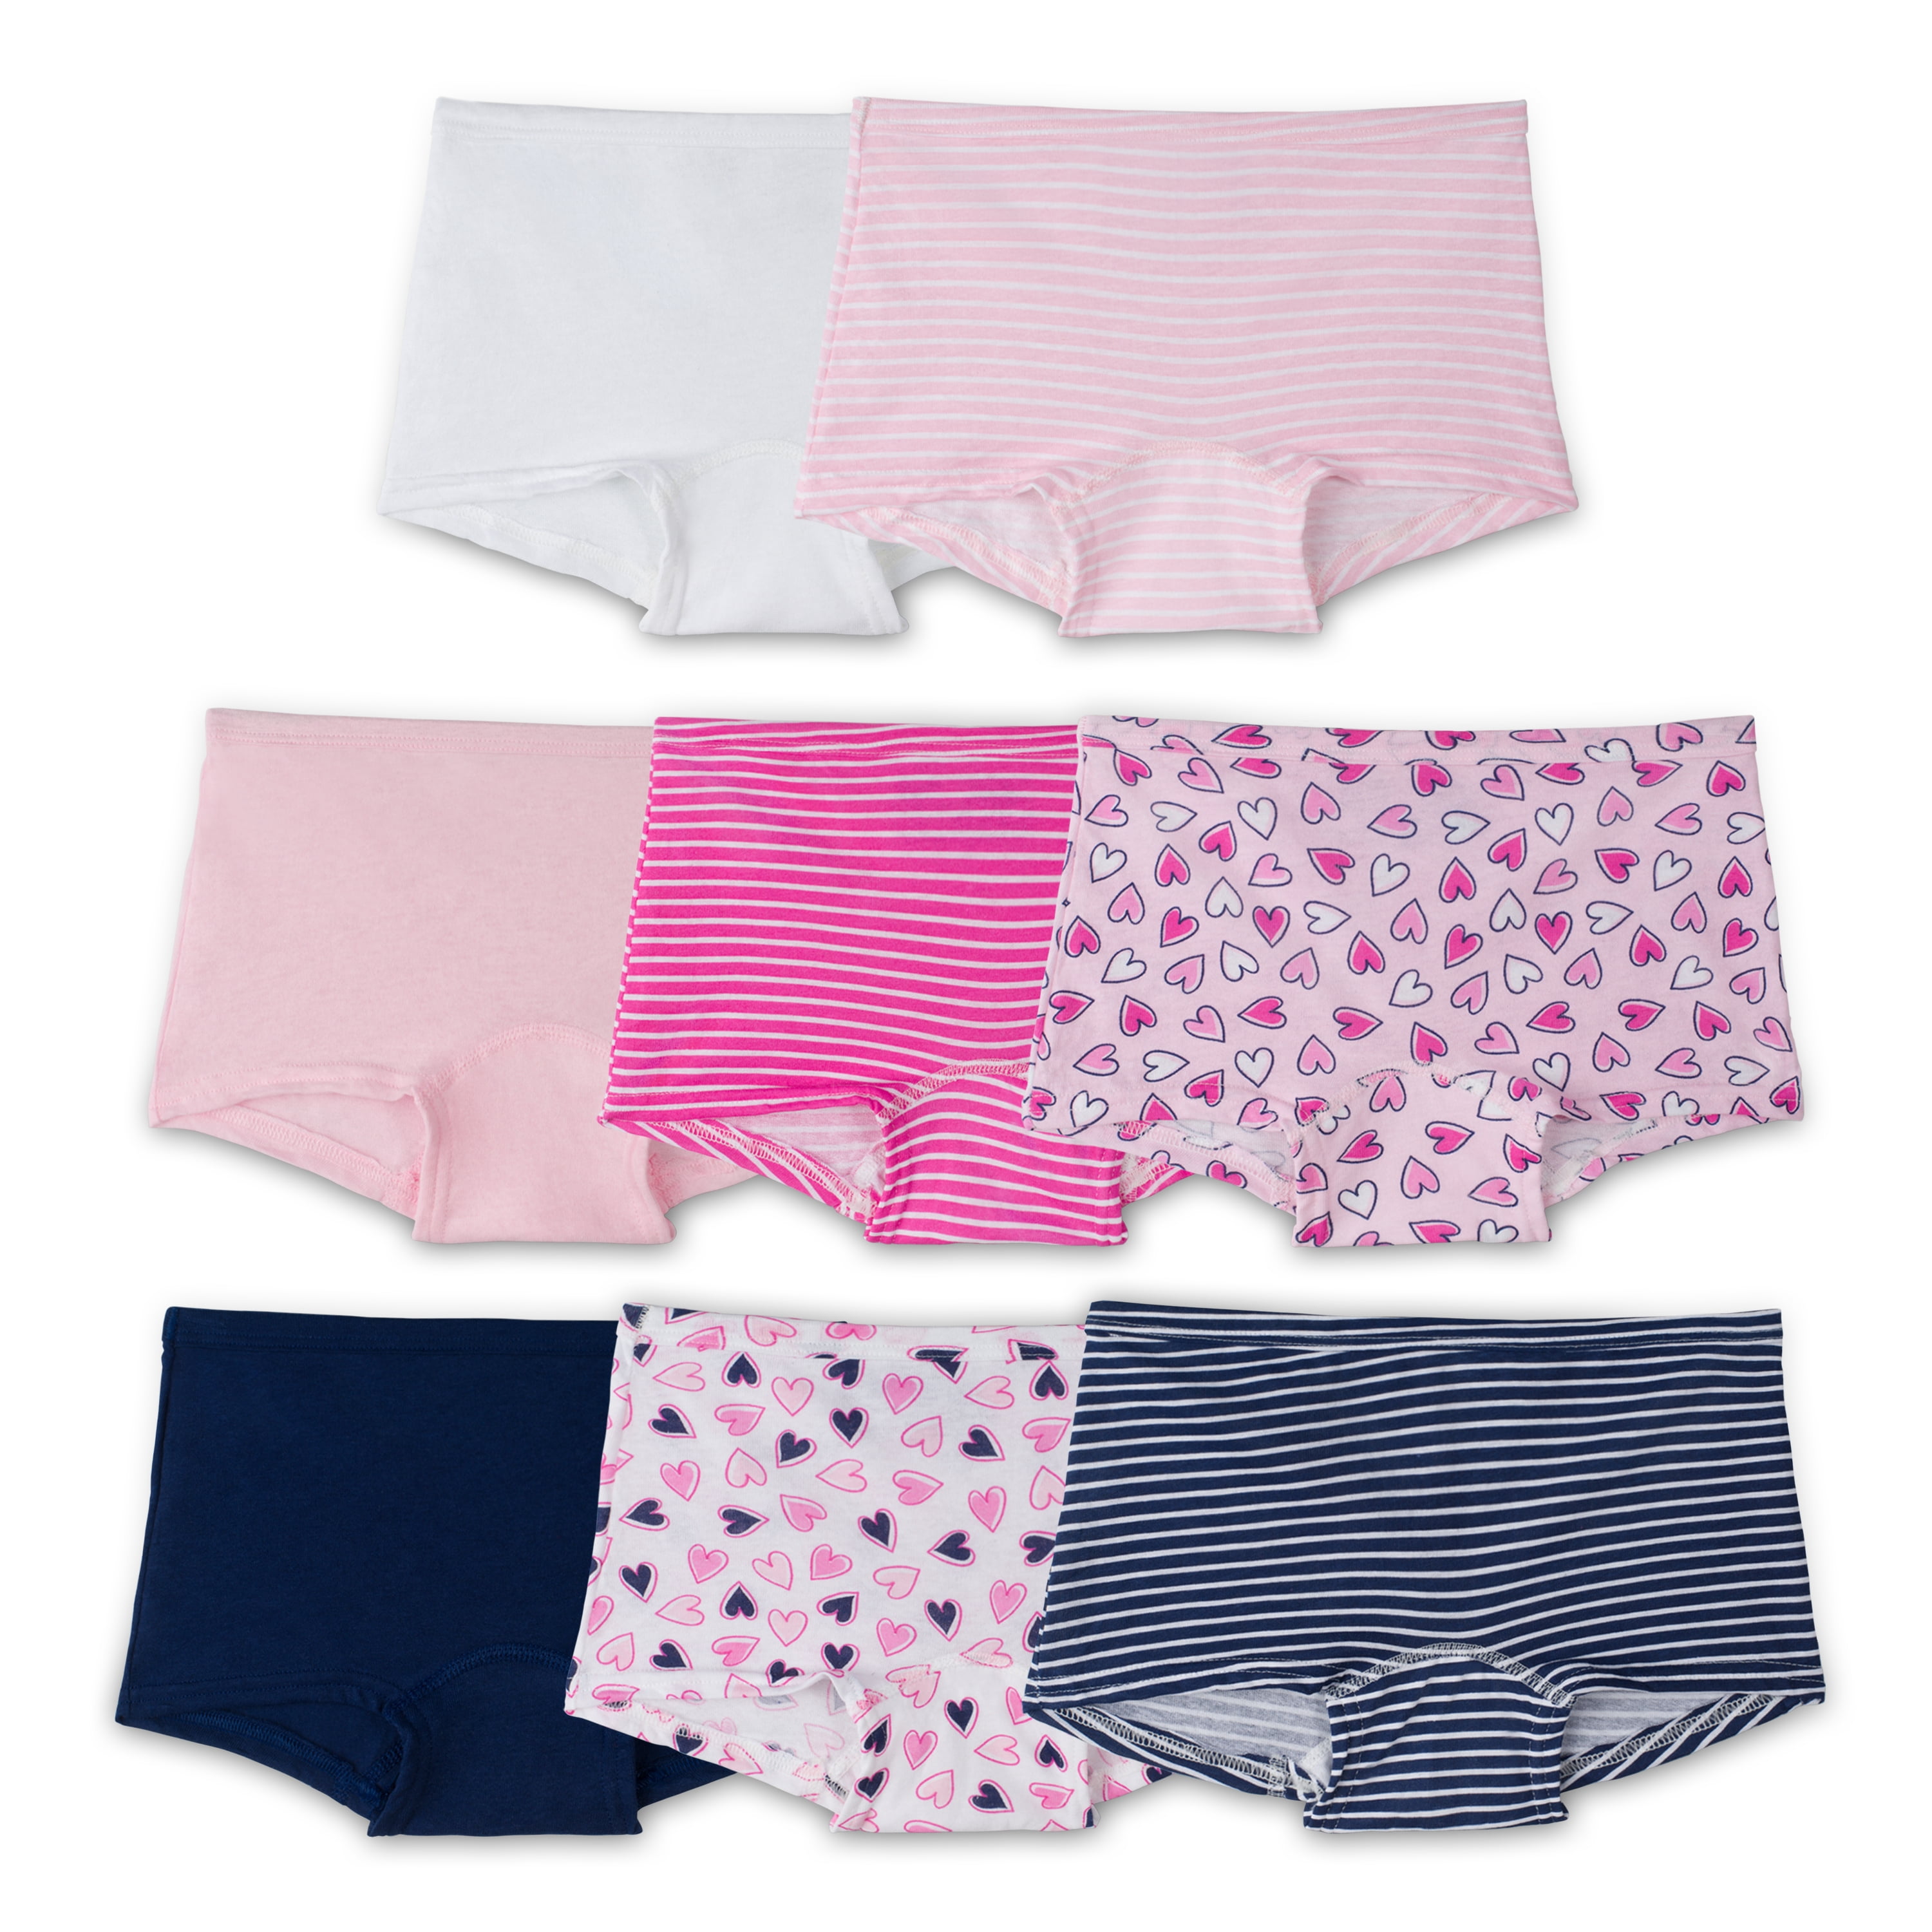 NEW 8 Pack Fruit of the Loom Girls Boy Shorts Panties Size 14 Tagless Underwear 